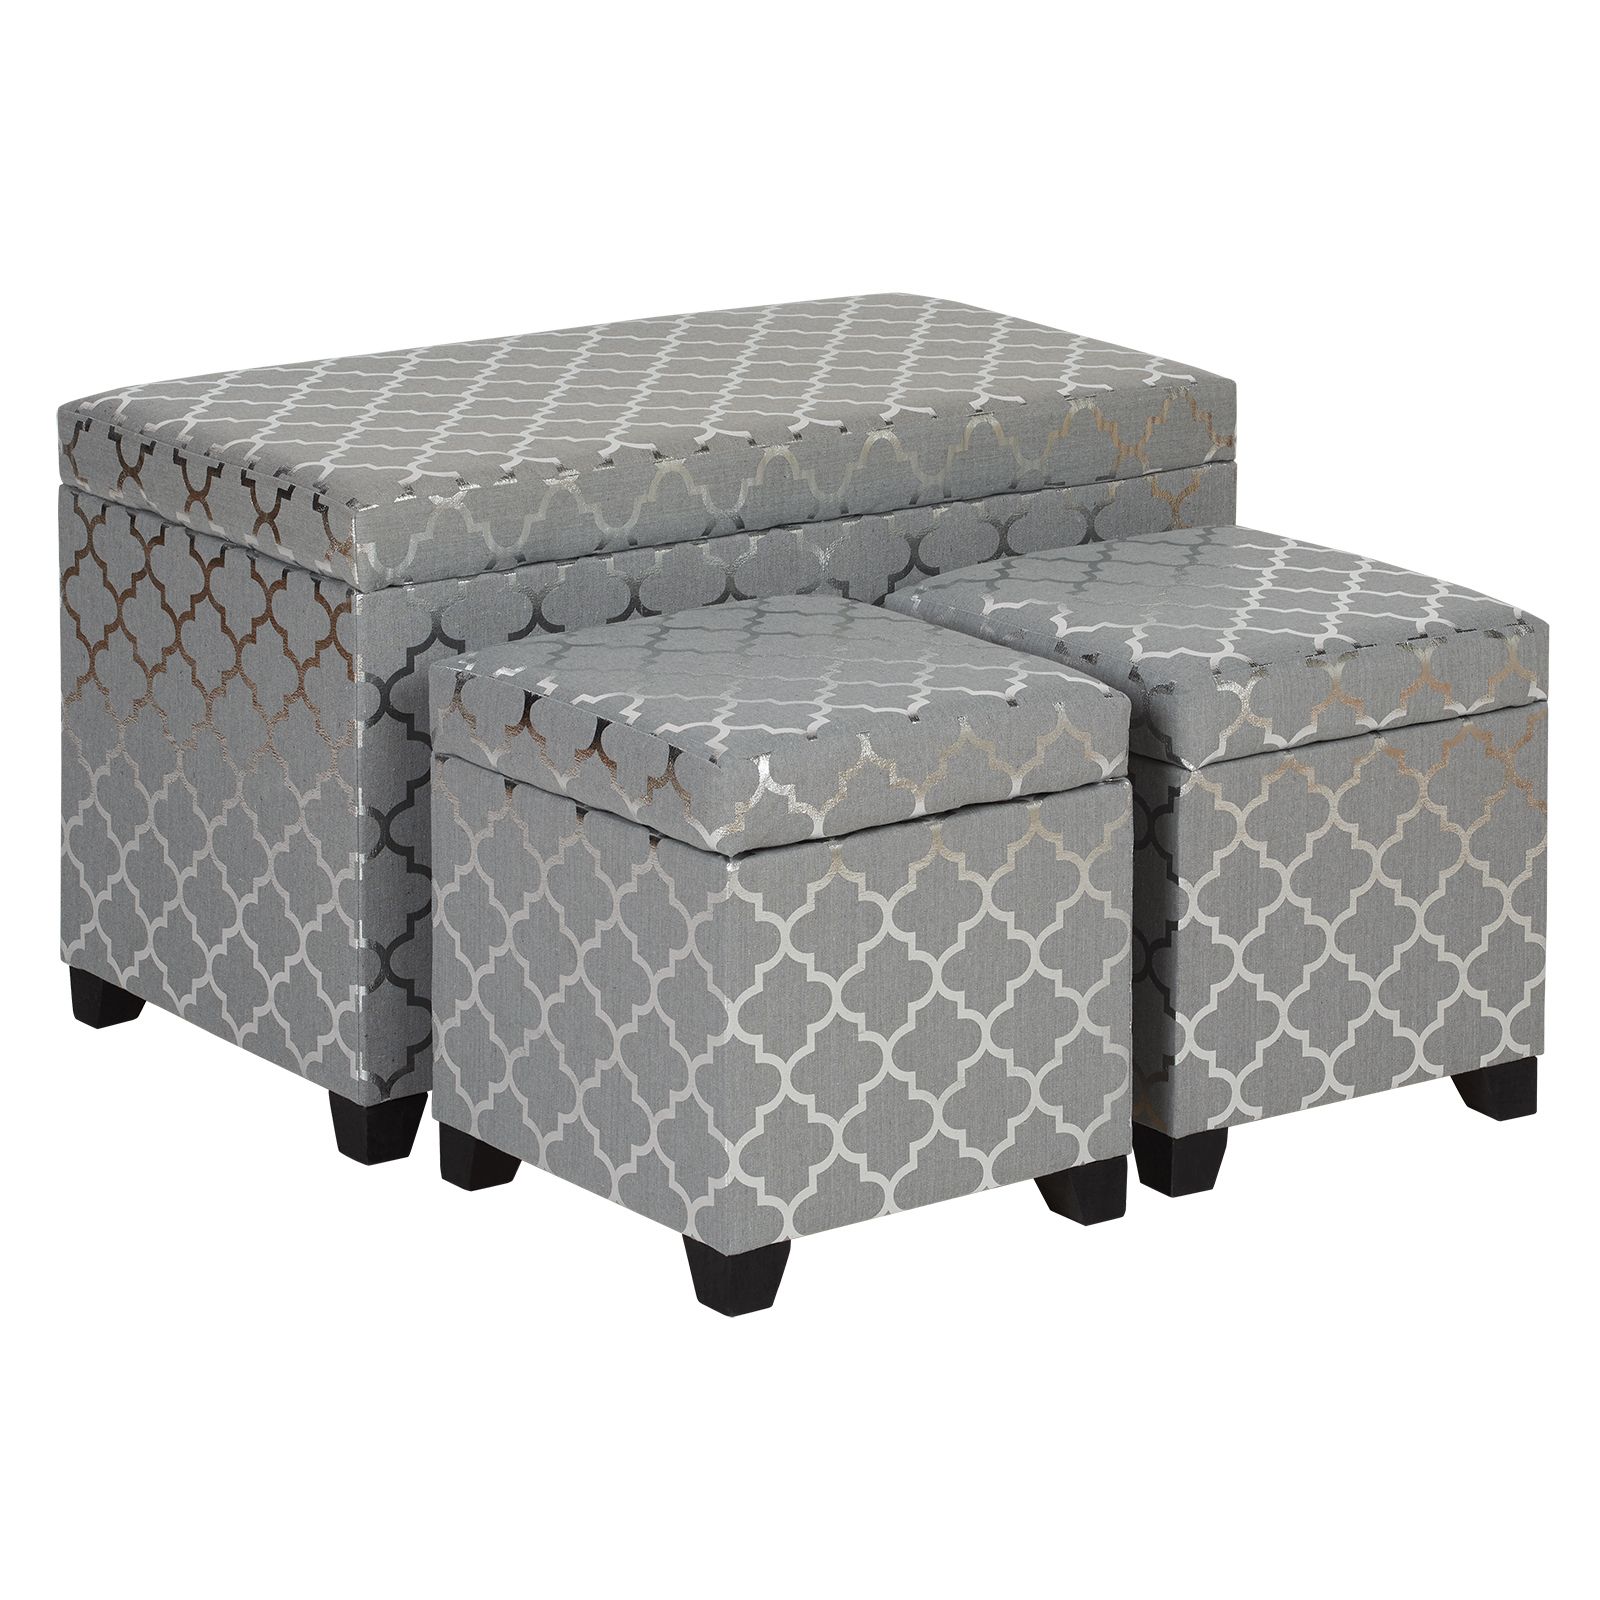 Hartleys Grey & Silver Storage Ottomans Set Of 3 Ottoman Stool/trunk Intended For Silver Faux Leather Ottomans With Pull Tab (View 10 of 20)